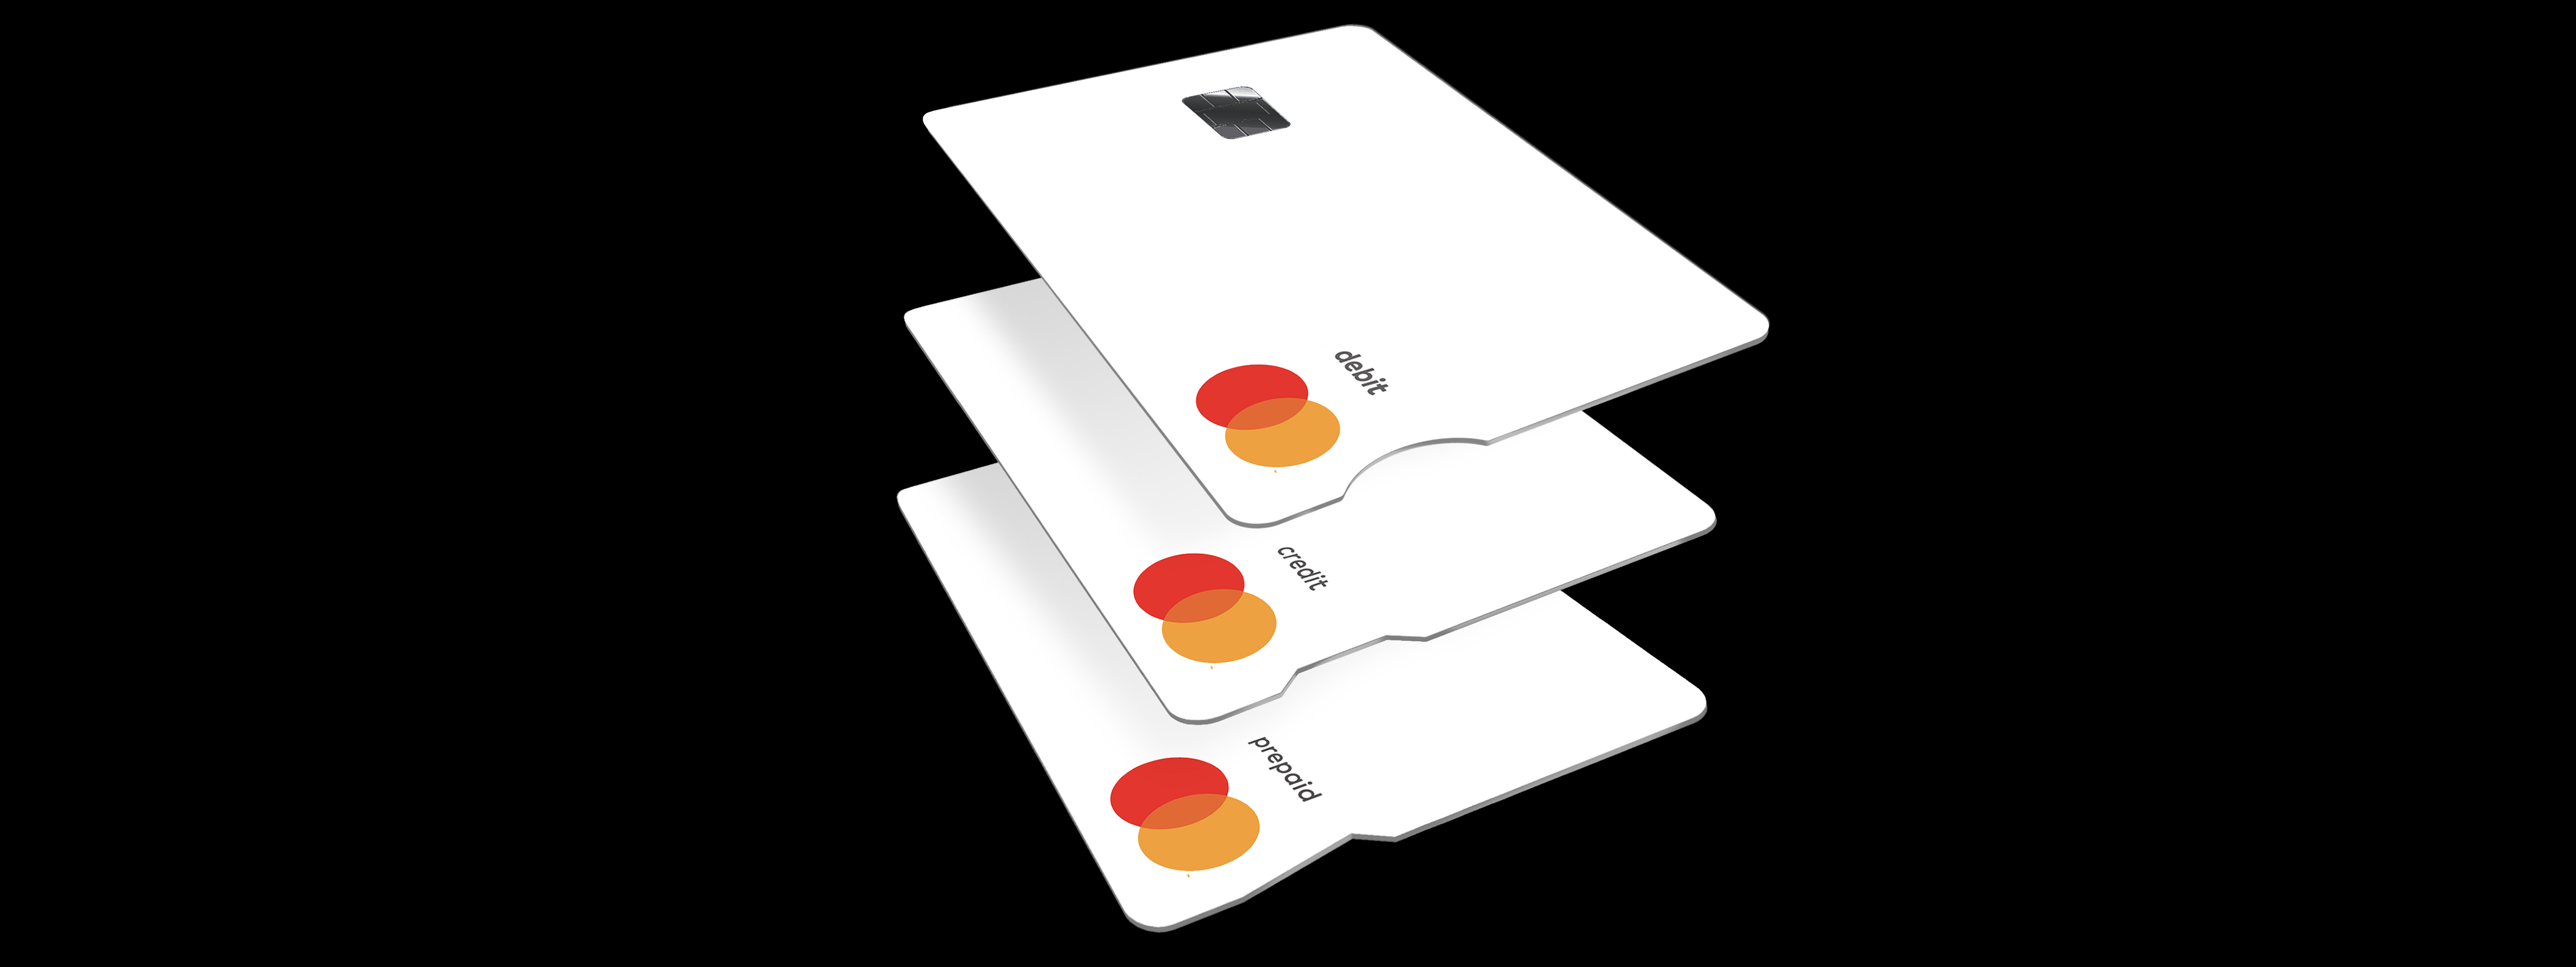 Image: New Touch Card debit card with a round notch, credit card with a squarish notch and prepaid card with a triangular notch.